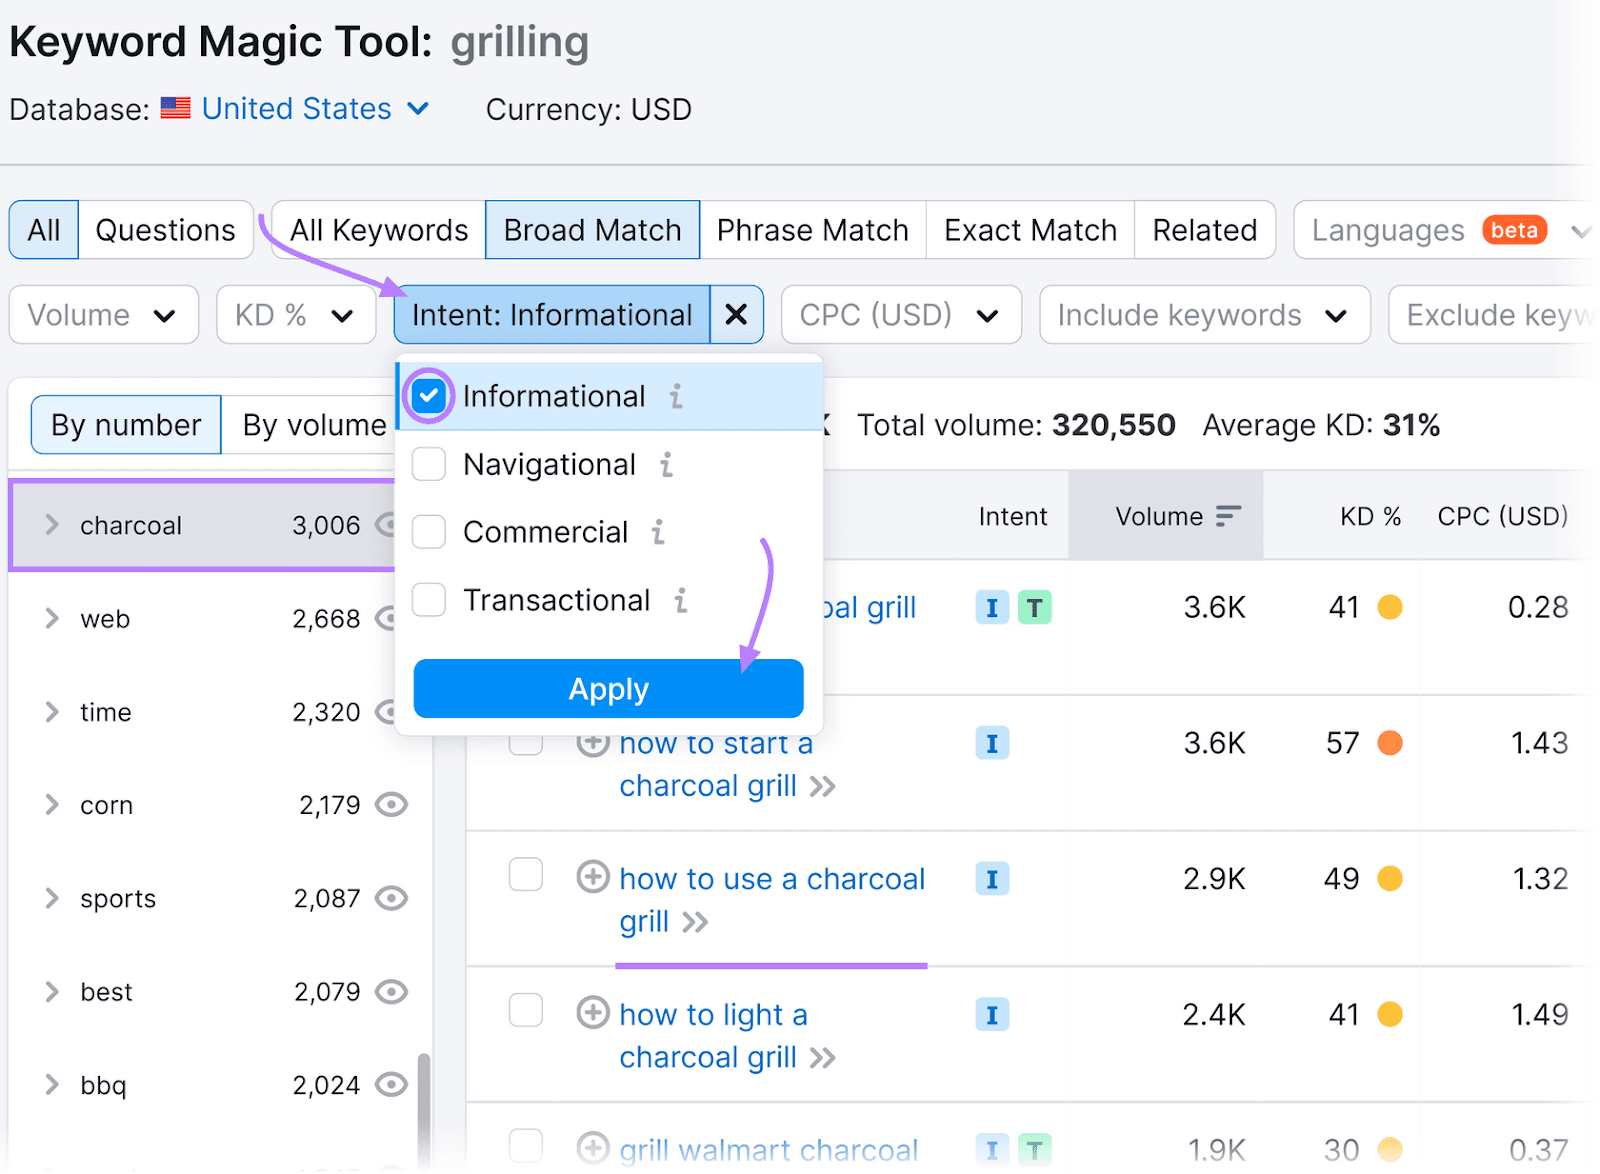 Keyword Magic Tool showing analytics for "grilling" with a focus on informational keyword intent and the "charcoal" subgroup.